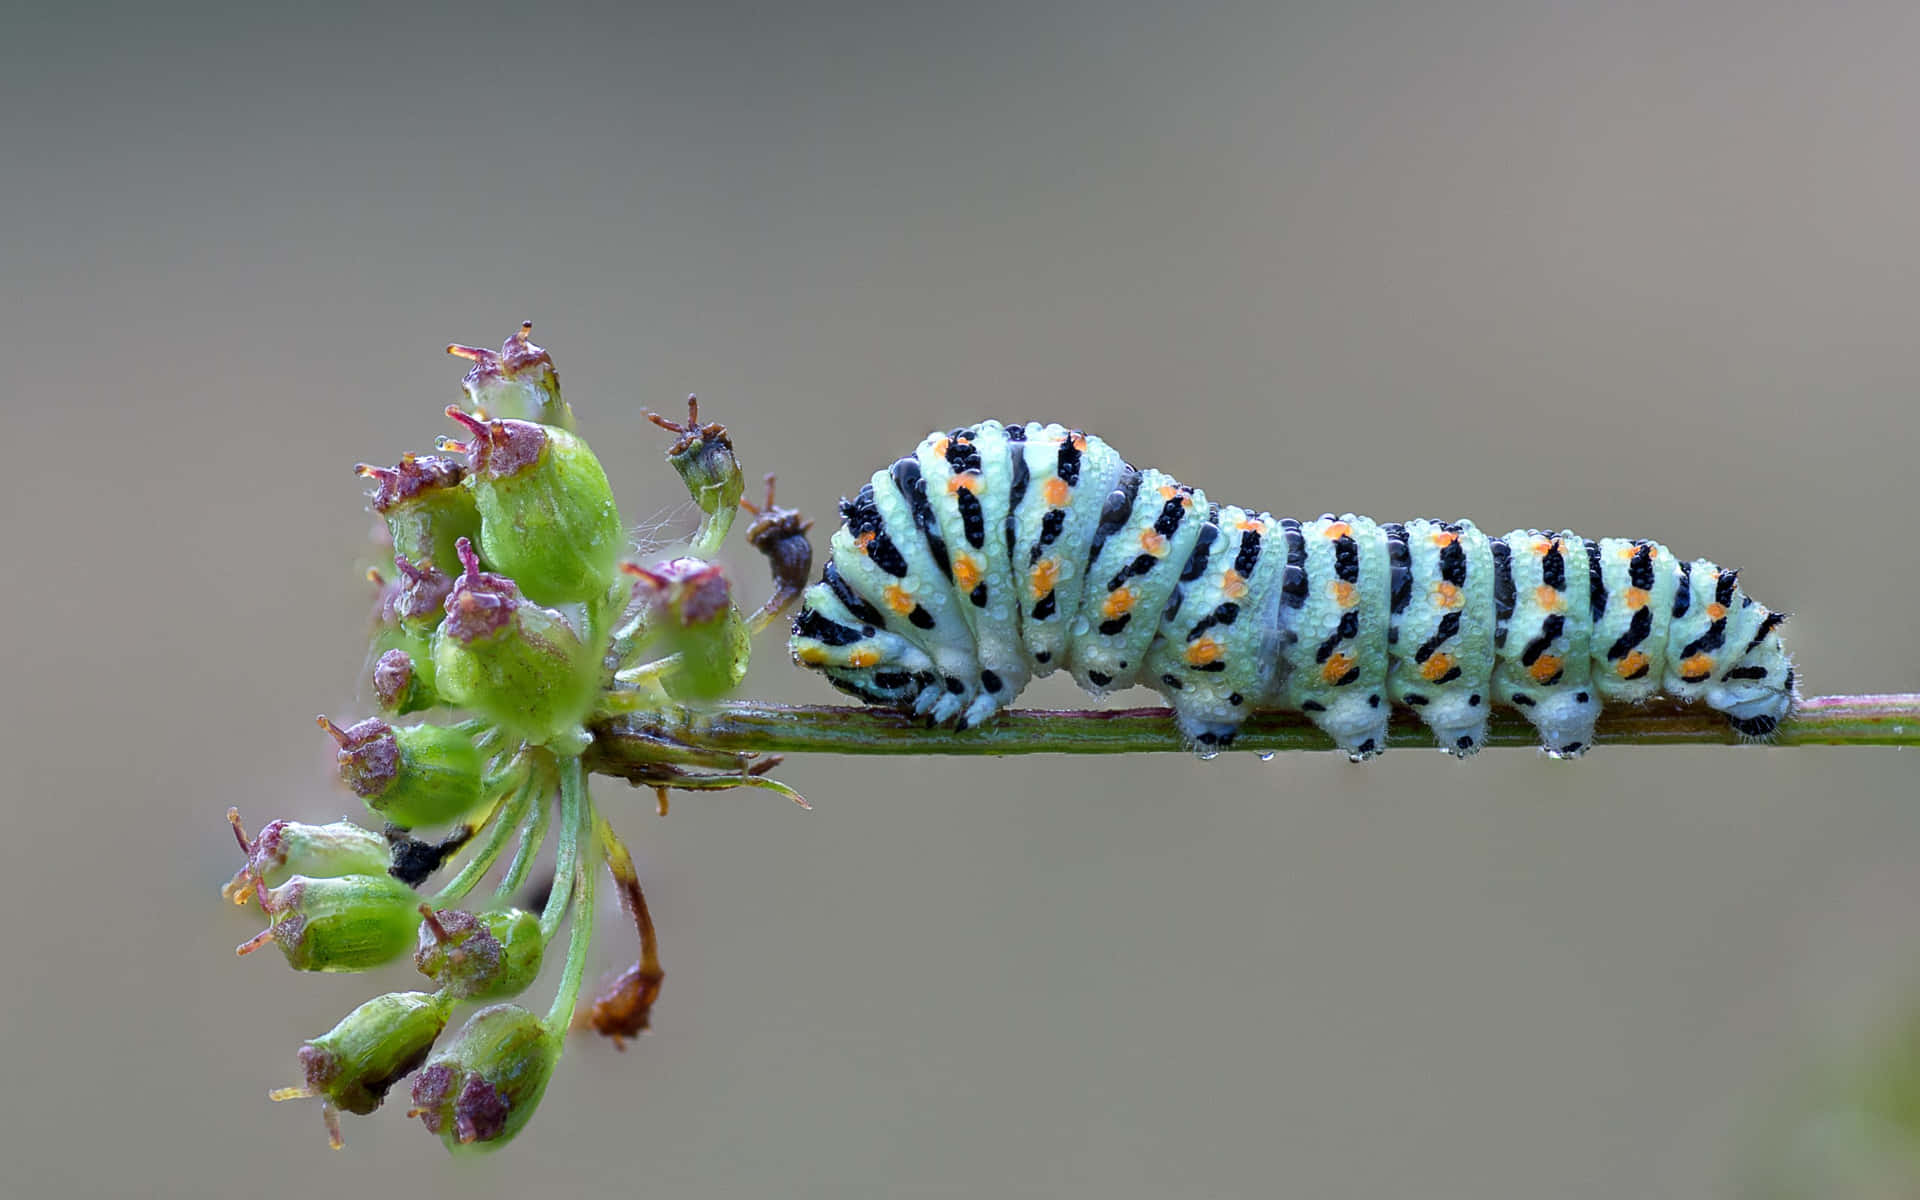 "Witness the Transformation: Caterpillar to Butterfly" Wallpaper